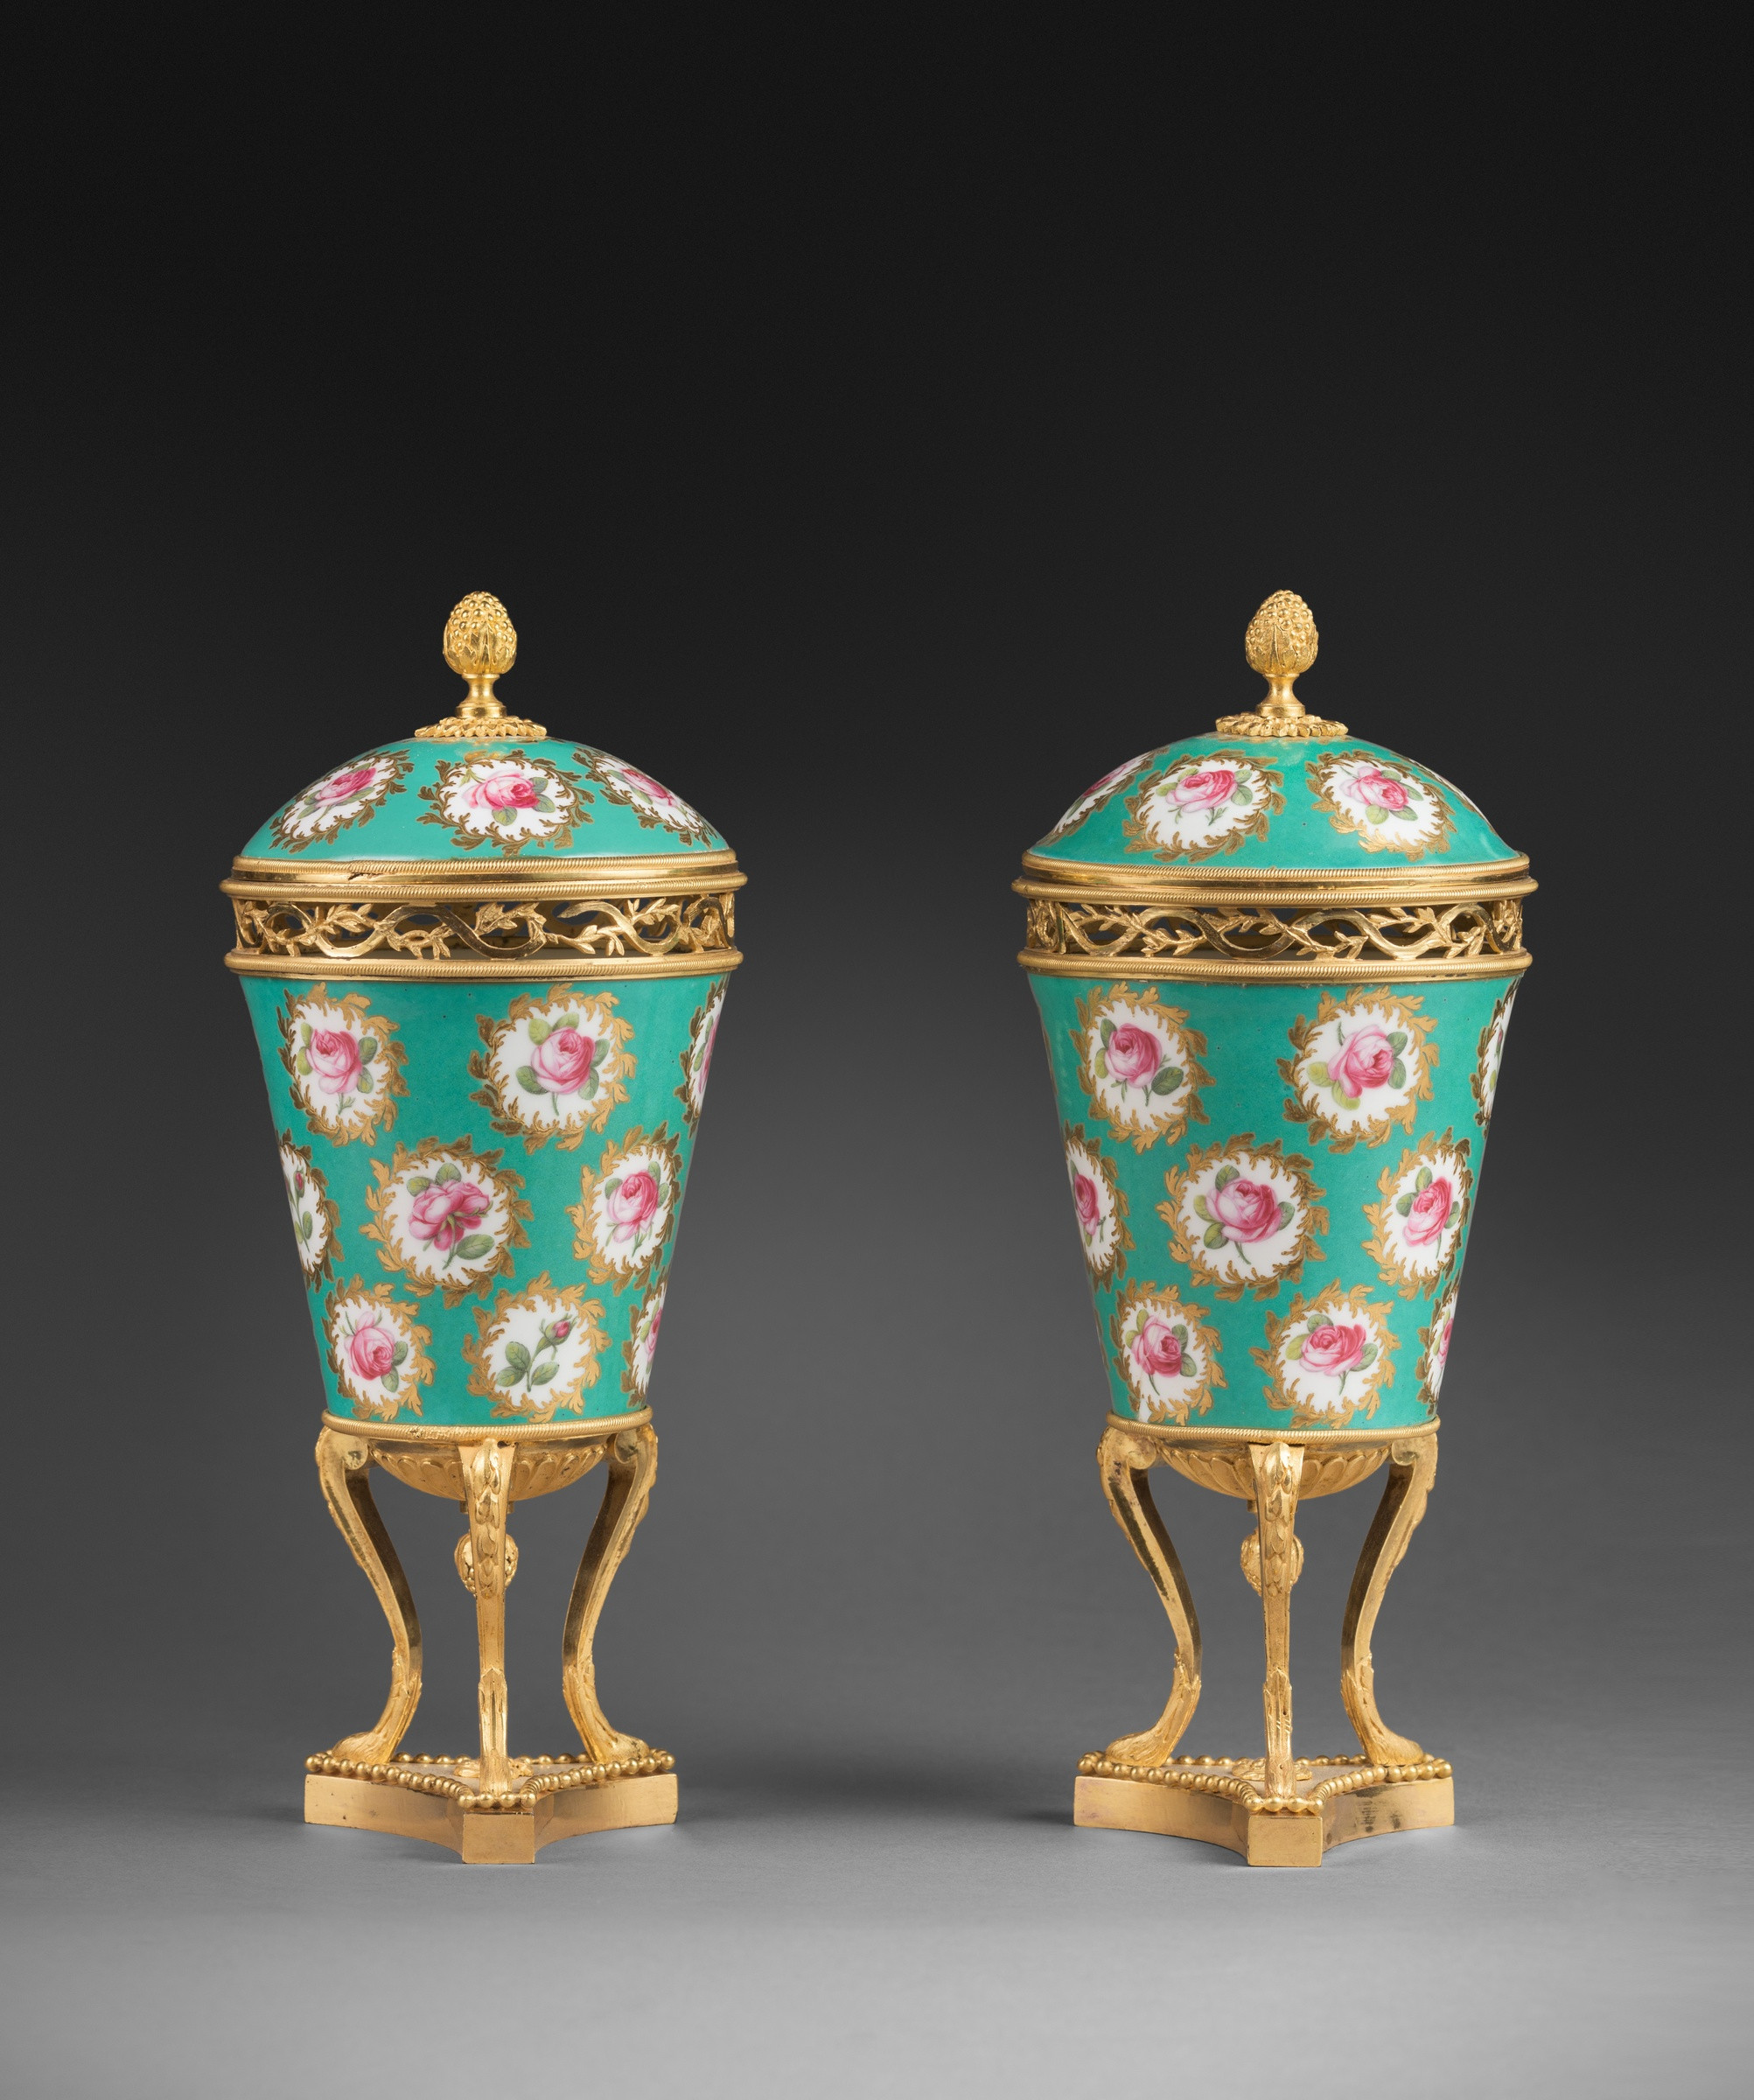 12 Fabulous Head Vases for Sale 2024 free download head vases for sale of sac2a8vres a pair of louis xvi pot purri vases by sac2a8vres paris date with regard to a pair of louis xvi pot purri vases by sac2a8vres